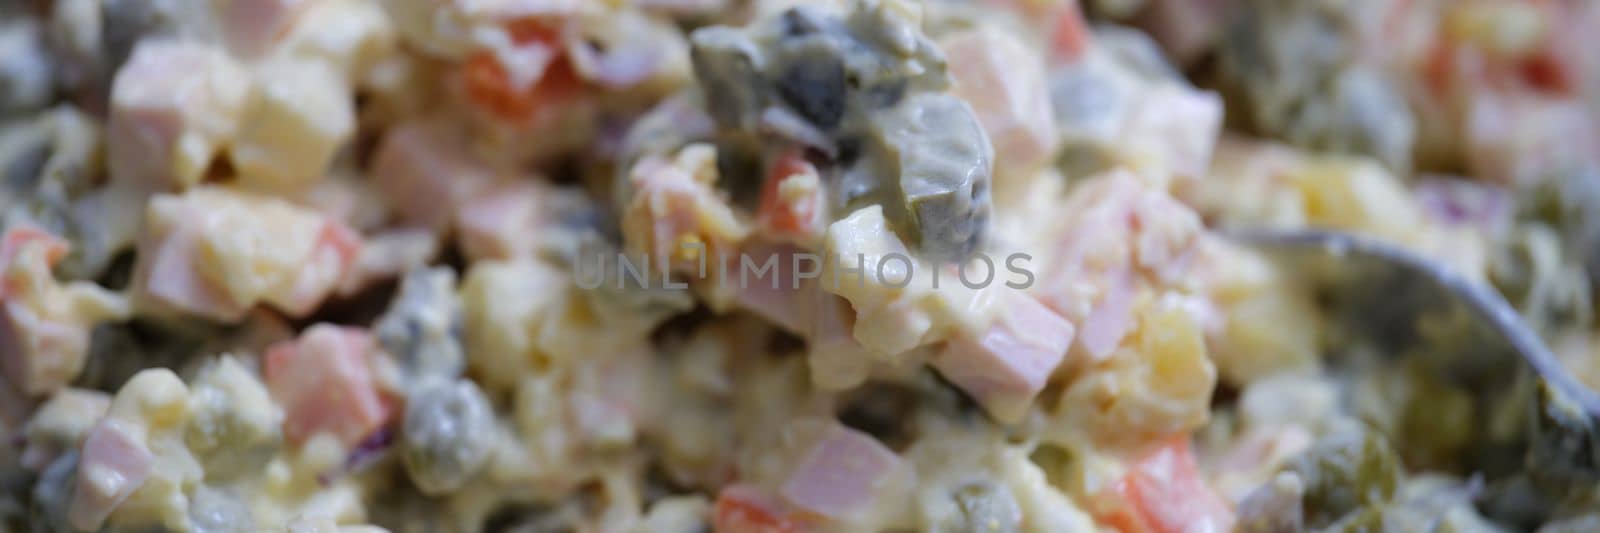 Olivier salad and food ingredients green peas cucumber potatoes sausage and mayonnaise by kuprevich